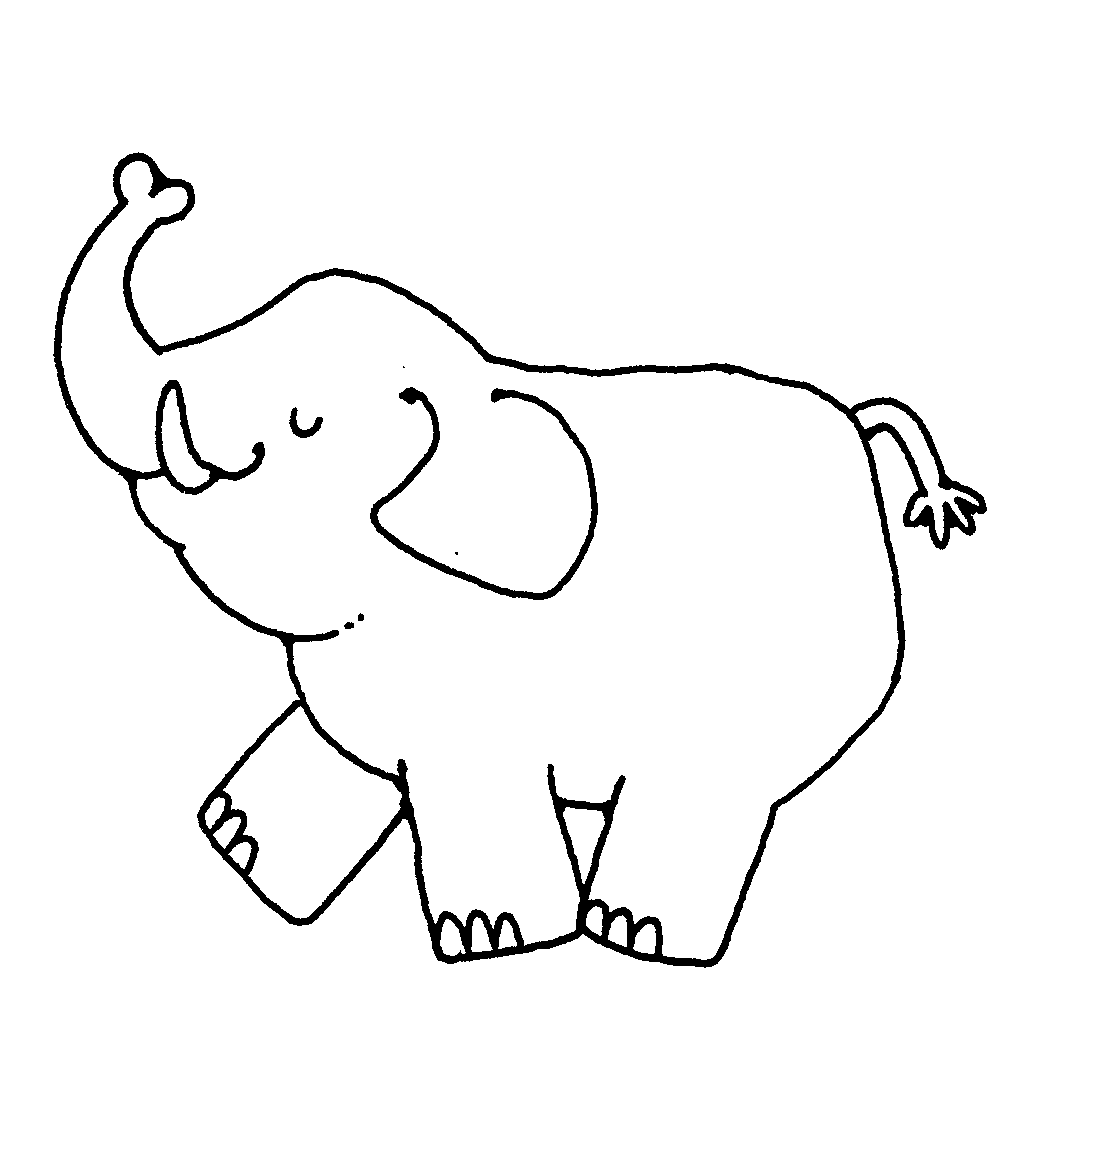 Elephant Clip Art Black And White Images  Pictures - Becuo